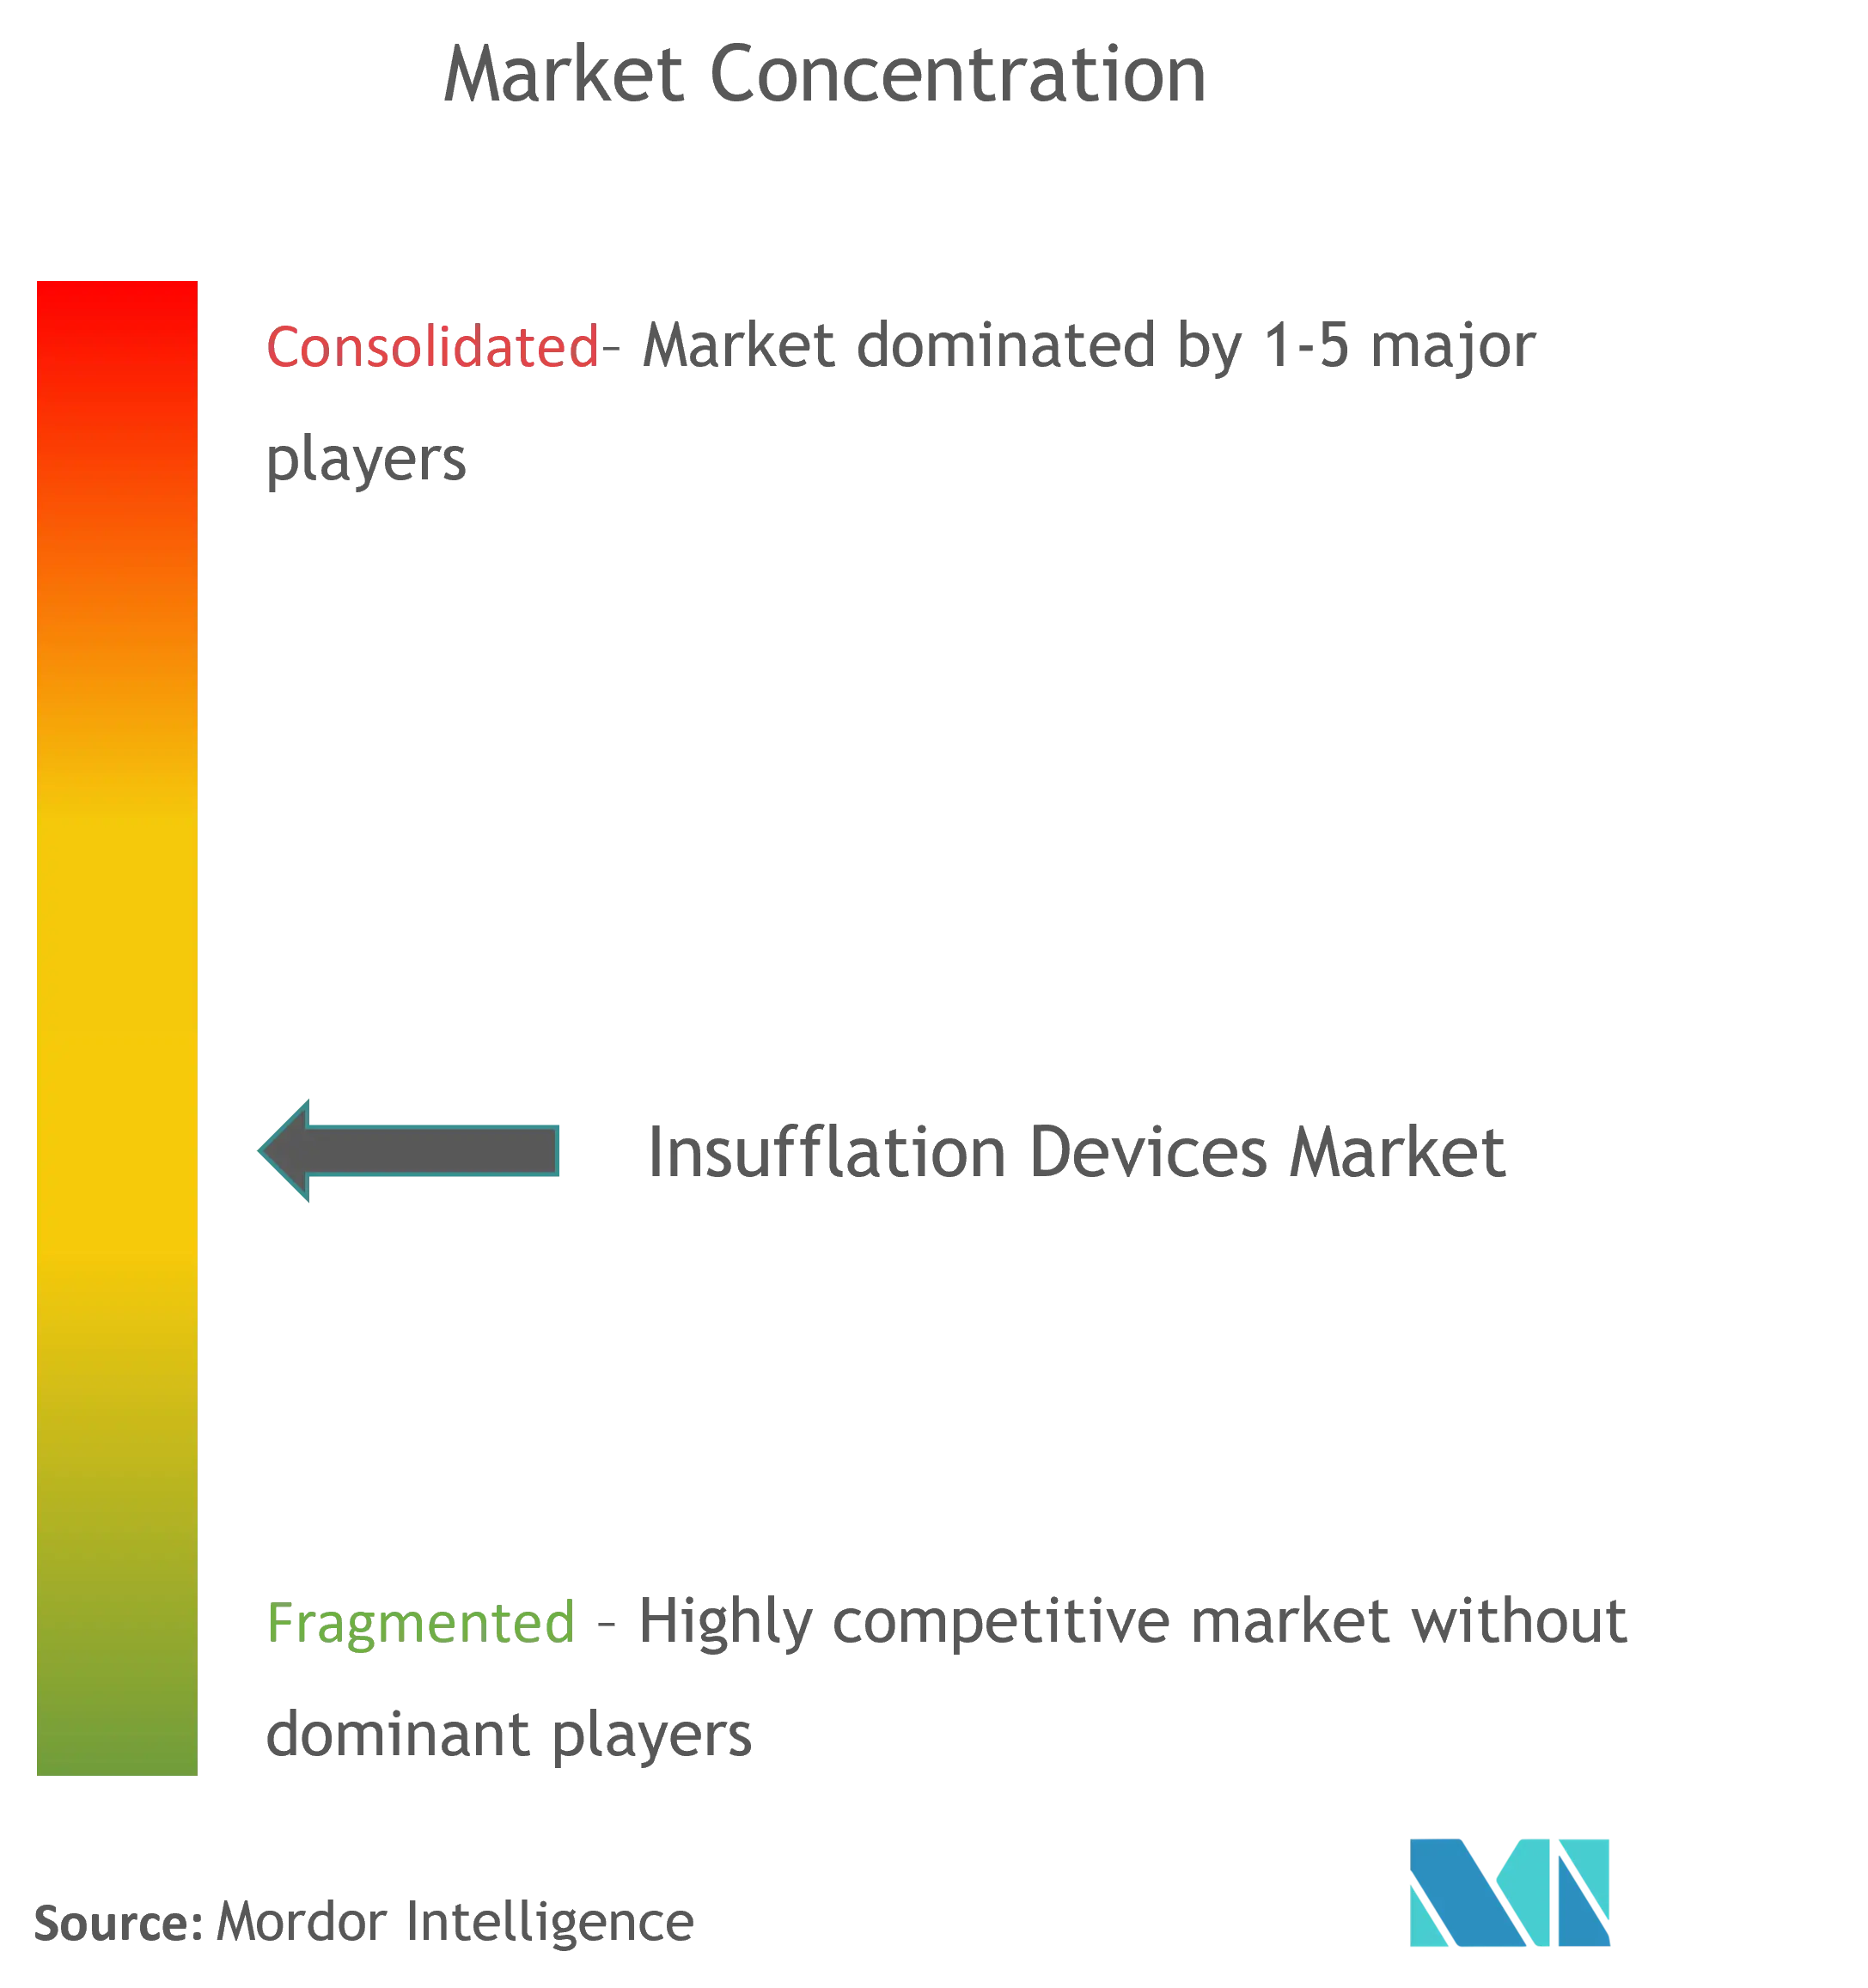 Insufflation Devices Market Concentration